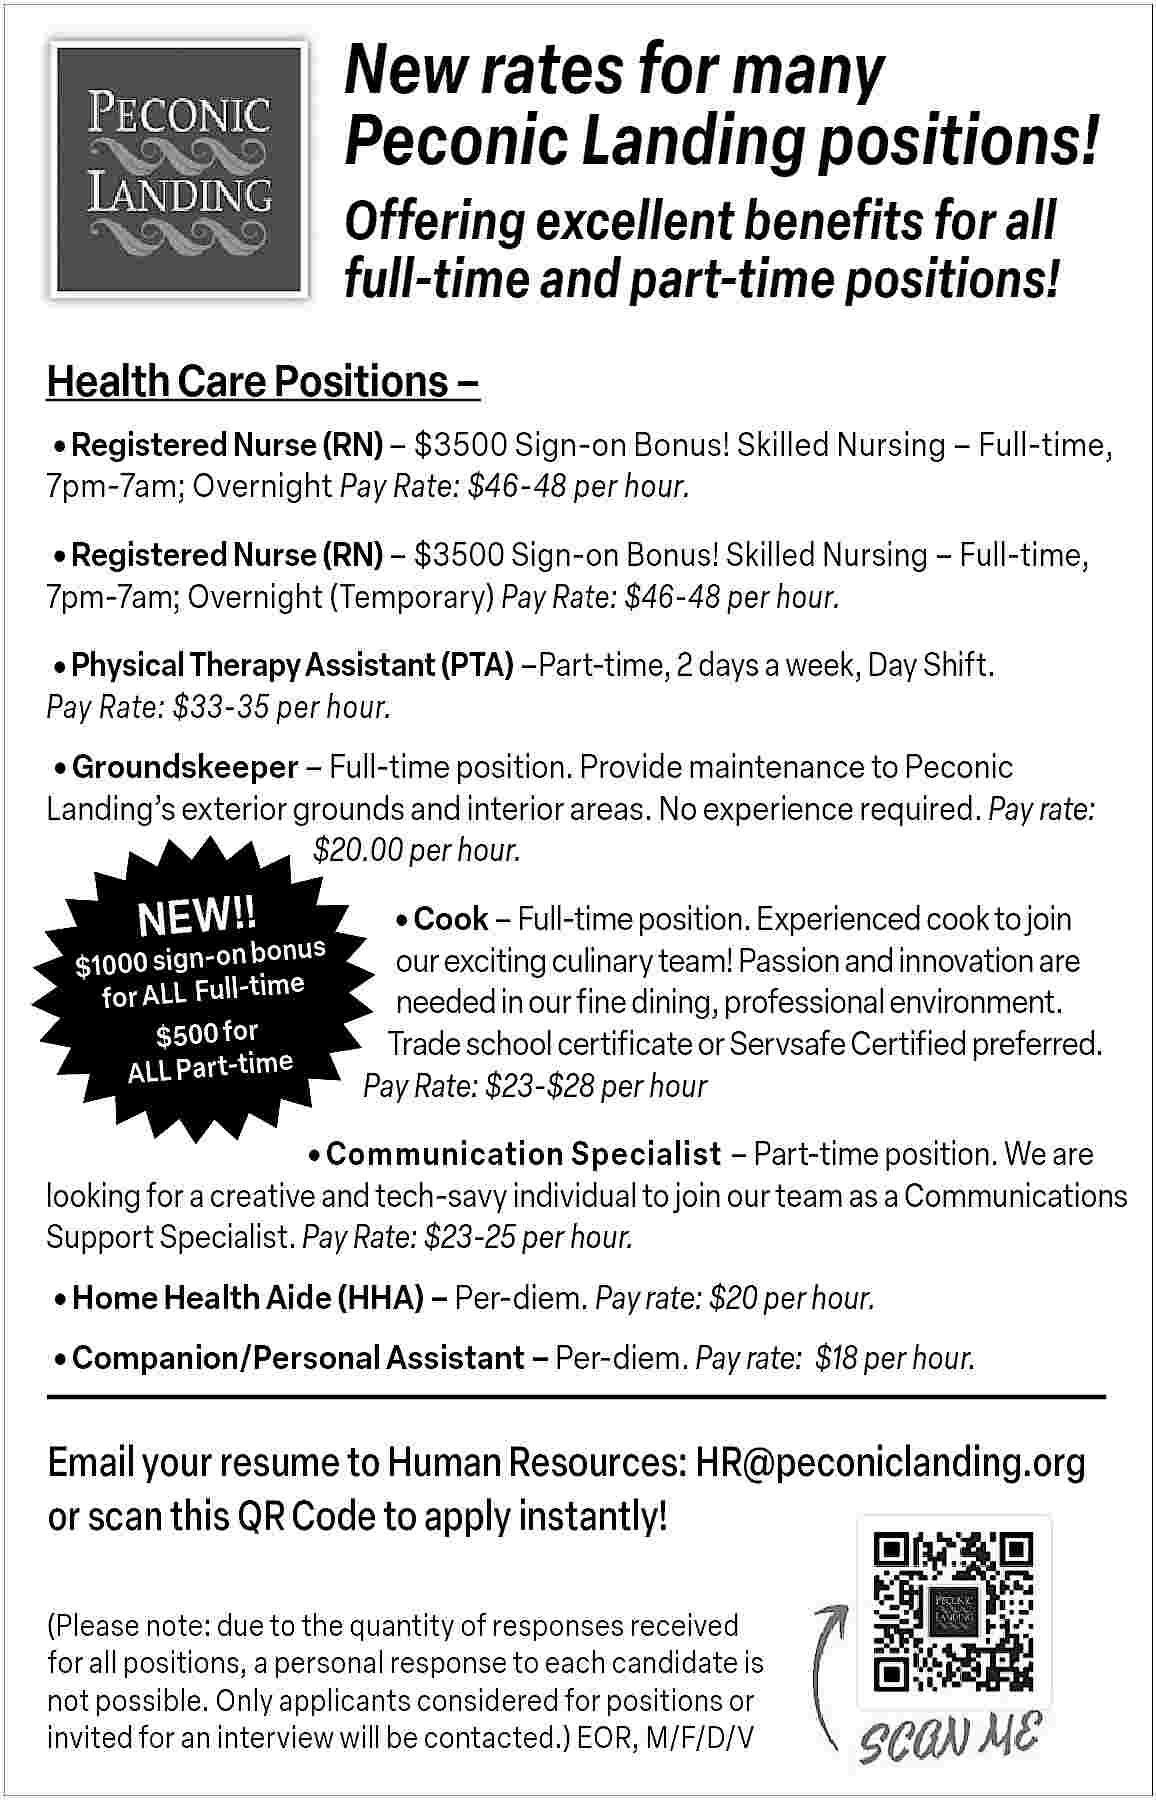 New rates for many <br>Peconic  New rates for many  Peconic Landing positions!  Offering excellent benefits for all  full-time and part-time positions!  Health Care Positions           Registered Nurse (RN)     $3500 Sign-on Bonus! Skilled Nursing     Full-time,  7pm-7am; Overnight Pay Rate: $46-48 per hour.       Registered Nurse (RN)     $3500 Sign-on Bonus! Skilled Nursing     Full-time,  7pm-7am; Overnight (Temporary) Pay Rate: $46-48 per hour.           Physical Therapy Assistant (PTA)    Part-time, 2 days a week, Day Shift.  Pay Rate: $33-35 per hour.           Groundskeeper     Full-time position. Provide maintenance to Peconic  Landing   s exterior grounds and interior areas. No experience required. Pay rate:  $20.00 per hour.    NEW!!    bonus  $1000 sign-on  e  for ALL   Full-tim  $500 for  ALL Part-time              Cook     Full-time position. Experienced cook to join    our exciting culinary team! Passion and innovation are  needed in our fine dining, professional environment.  Trade school certificate or Servsafe Certified preferred.  Pay Rate: $23-$28 per hour    Communication Specialist     Part-time position. We are  looking for a creative and tech-savy individual to join our team as a Communications  Support Specialist. Pay Rate: $23-25 per hour.       Home Health Aide (HHA)     Per-diem. Pay rate: $20 per hour.     Companion/Personal Assistant     Per-diem. Pay rate: $18 per hour.    Email your resume to Human Resources: HR@peconiclanding.org  or scan this QR Code to apply instantly!  (Please note: due to the quantity of responses received  for all positions, a personal response to each candidate is  not possible. Only applicants considered for positions or  invited for an interview will be contacted.) EOR, M/F/D/V     